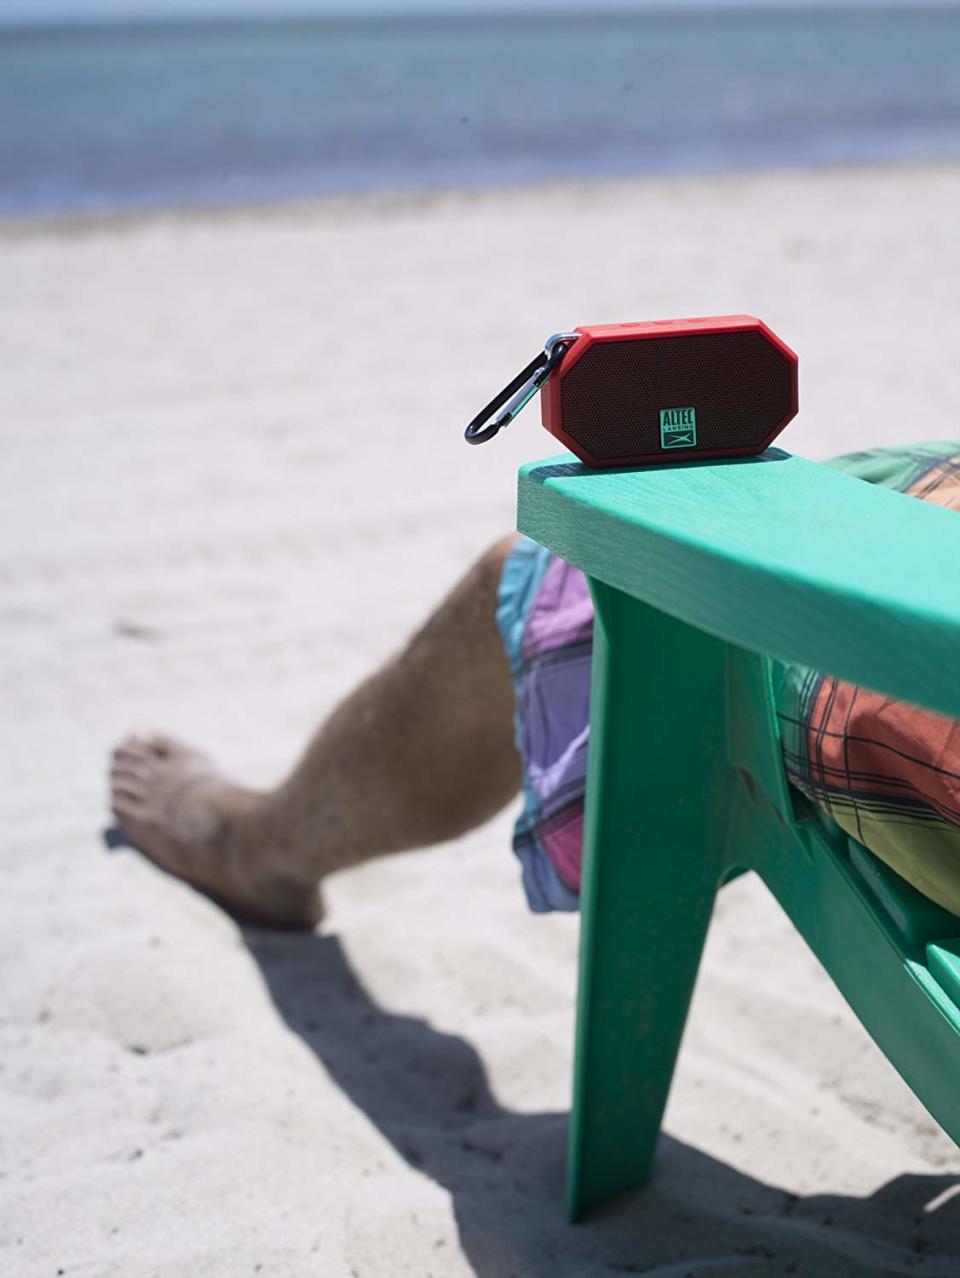 Waterproof and shockproof, this speaker is your new BFF (beach friend forever). (Photo: Amazon) 